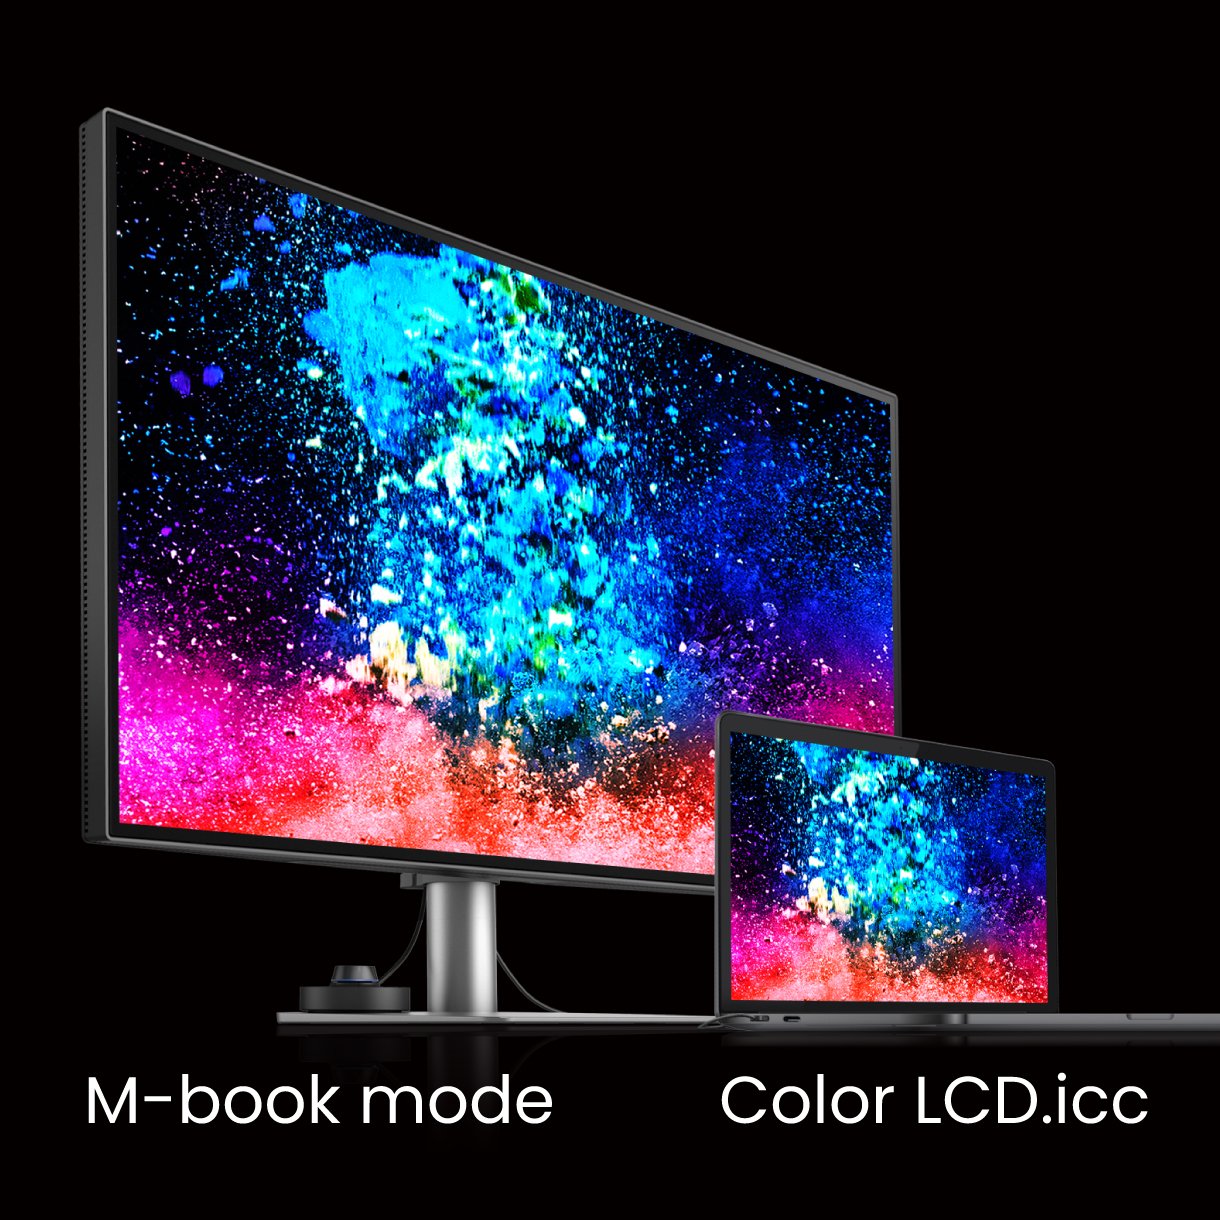 BenQ PD3220U ships from the factory with default color settings that perfectly match Mac® and MacBook® Pro laptop colors and BenQ exclusive M-Book mode on the PD3220U provides active color syncing between Macs and the monitor while you work.